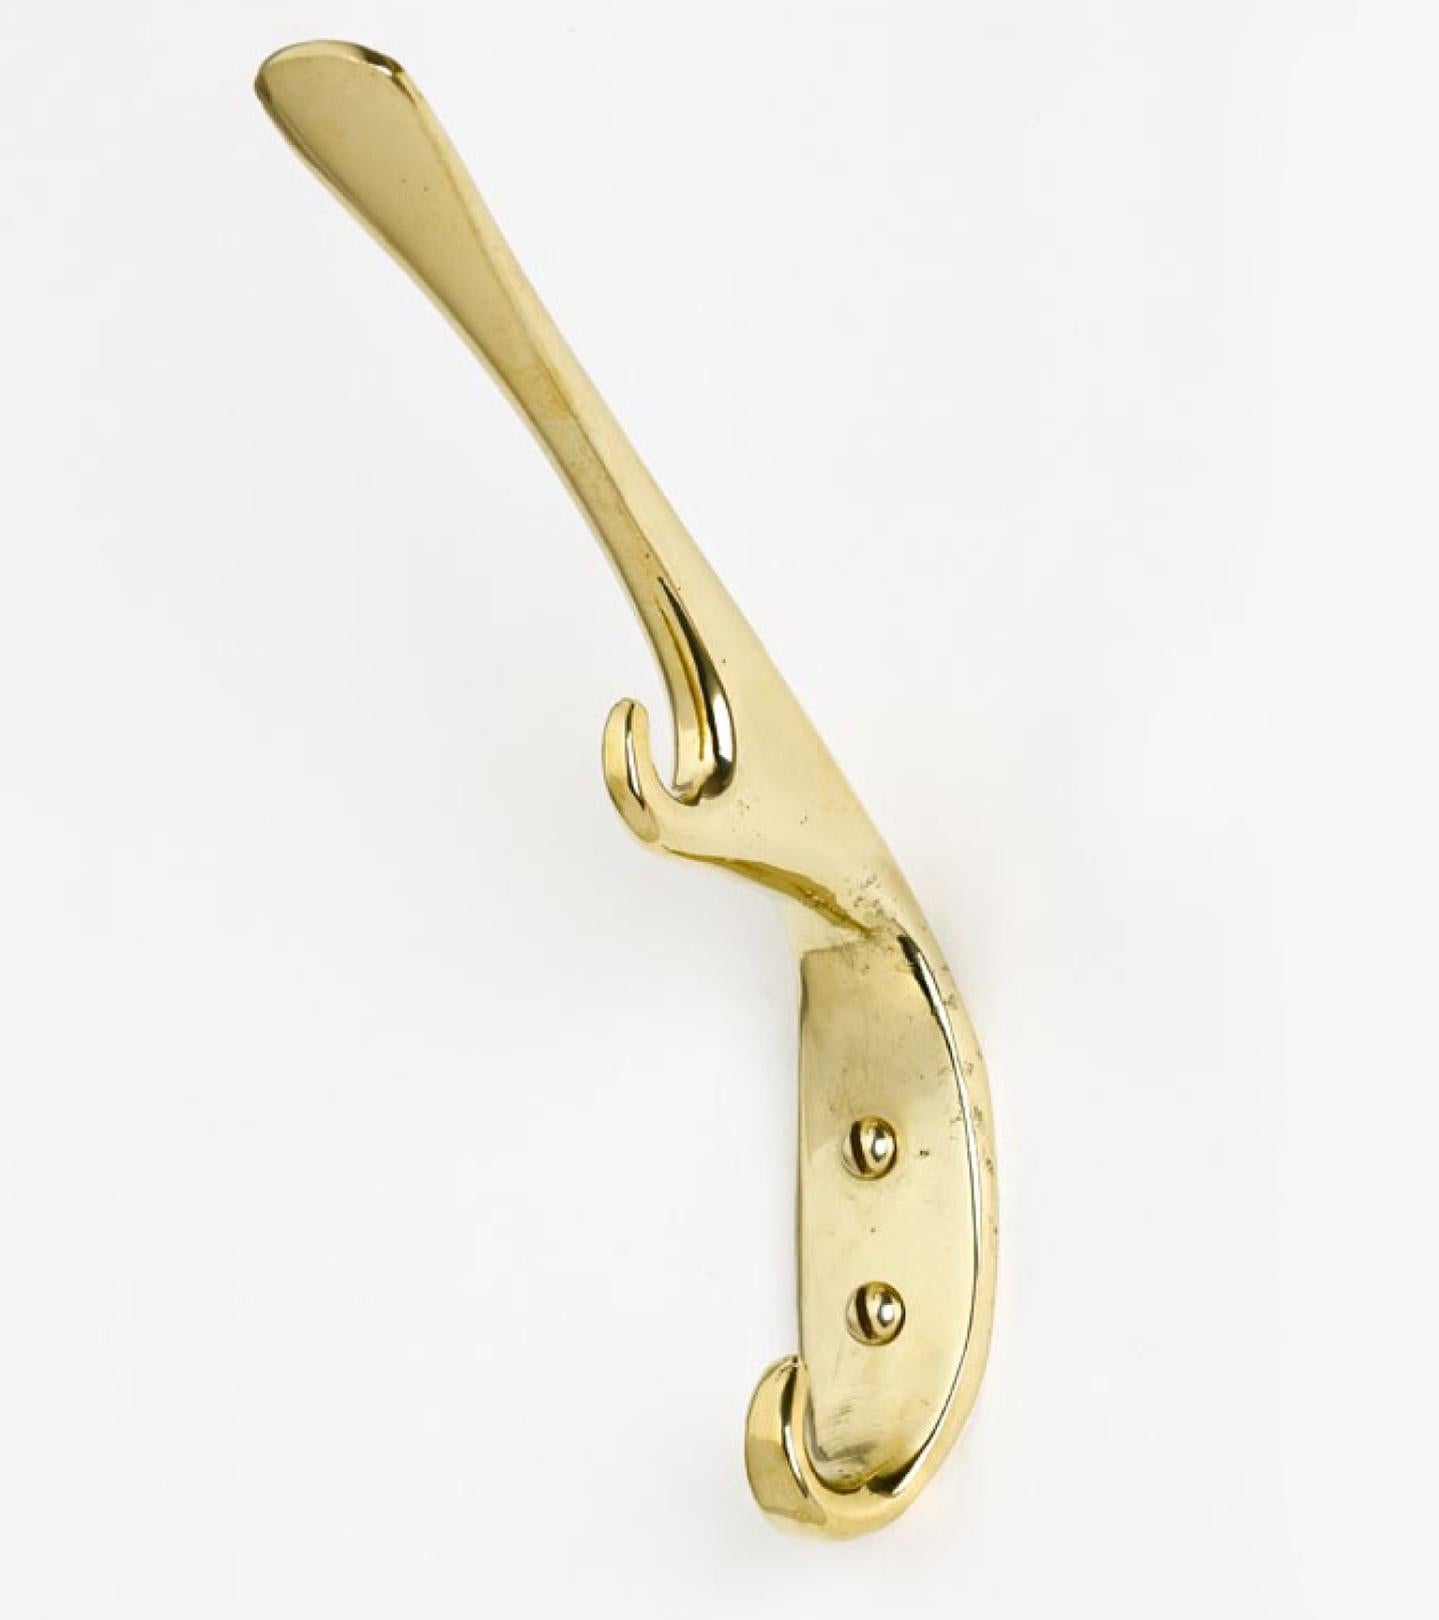 Carl Auböck brass #5439 brass hook. Designed in the 1950s, this versatile and Minimalist Viennese candleholder is executed in polished brass by Werkstätte Carl Auböck, Austria.

Price is per item. Two in stock ready to ship. Available in unlimited